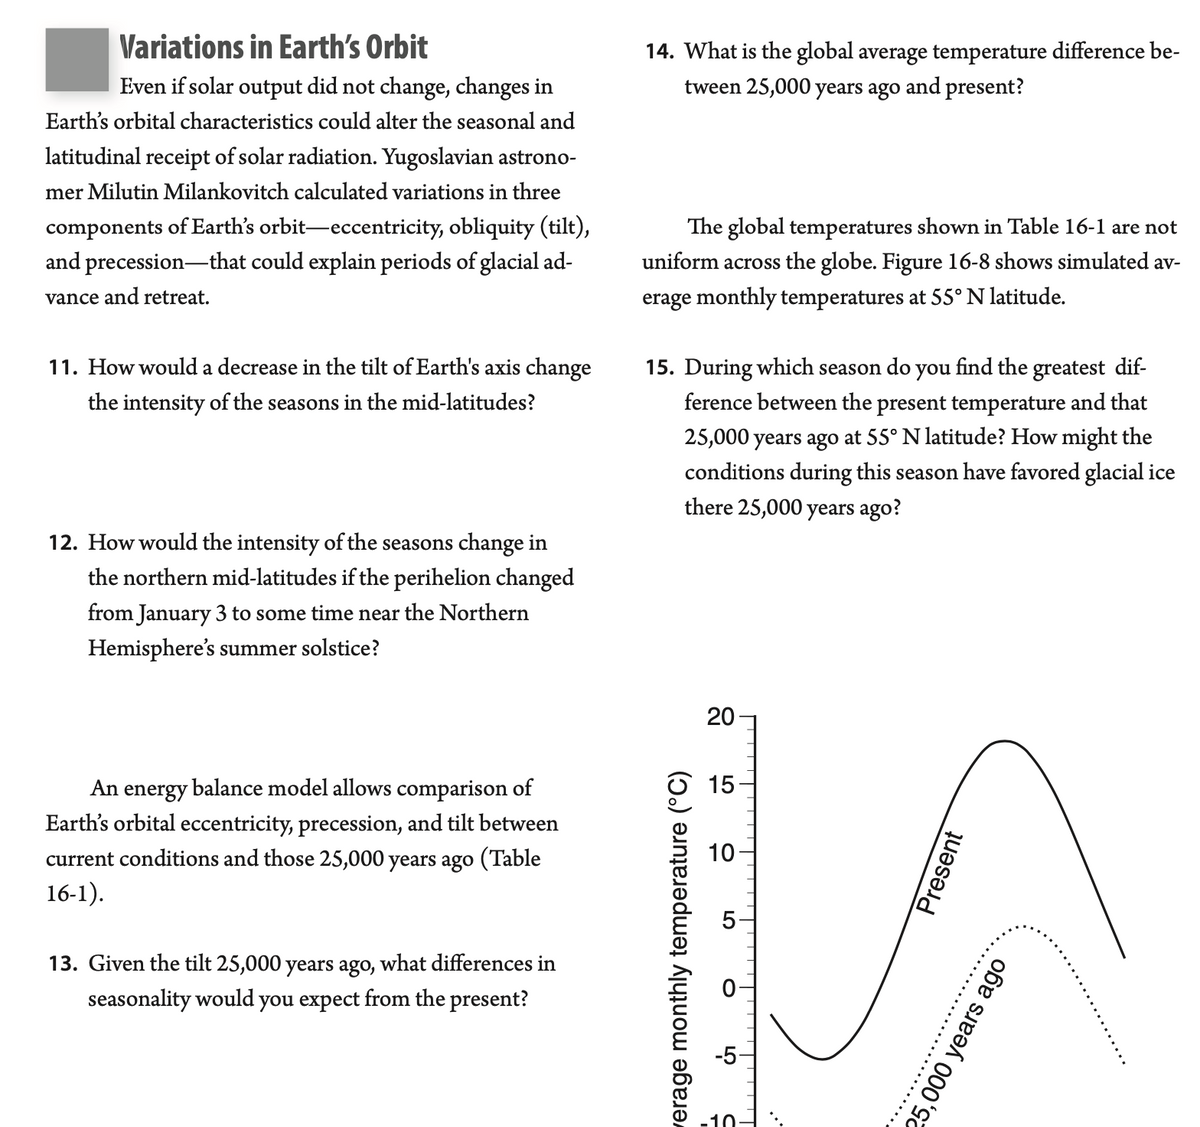 Variations in Earth's Orbit
14. What is the global average temperature difference be-
tween 25,000 years ago and present?
Even if solar output did not change, changes in
Earth's orbital characteristics could alter the seasonal and
latitudinal receipt of solar radiation. Yugoslavian astrono-
mer Milutin Milankovitch calculated variations in three
components of Earth's orbit-eccentricity, obliquity (tilt),
and precession-that could explain periods of glacial ad-
The global temperatures shown in Table 16-1 are not
uniform across the globe. Figure 16-8 shows simulated av-
vance and retreat.
erage monthly temperatures at 55°N latitude.
11. How would a decrease in the tilt of Earth's axis change
15. During which season do you find the greatest dif-
ference between the present temperature and that
the intensity of the seasons in the mid-latitudes?
25,000 years ago at 55° N latitude? How might the
conditions during this season have favored glacial ice
there 25,000 years ago?
12. How would the intensity of the seasons change in
the northern mid-latitudes if the perihelion changed
from January 3 to some time near the Northern
Hemisphere's summer solstice?
15
An energy balance model allows comparison of
Earth's orbital eccentricity, precession, and tilt between
current conditions and those 25,000 years ago (Table
16-1).
10
13. Given the tilt 25,000 years ago, what differences in
seasonality would you expect from the present?
-5-
обе
..........................
verage monthly temperature (°C)
Present
20
